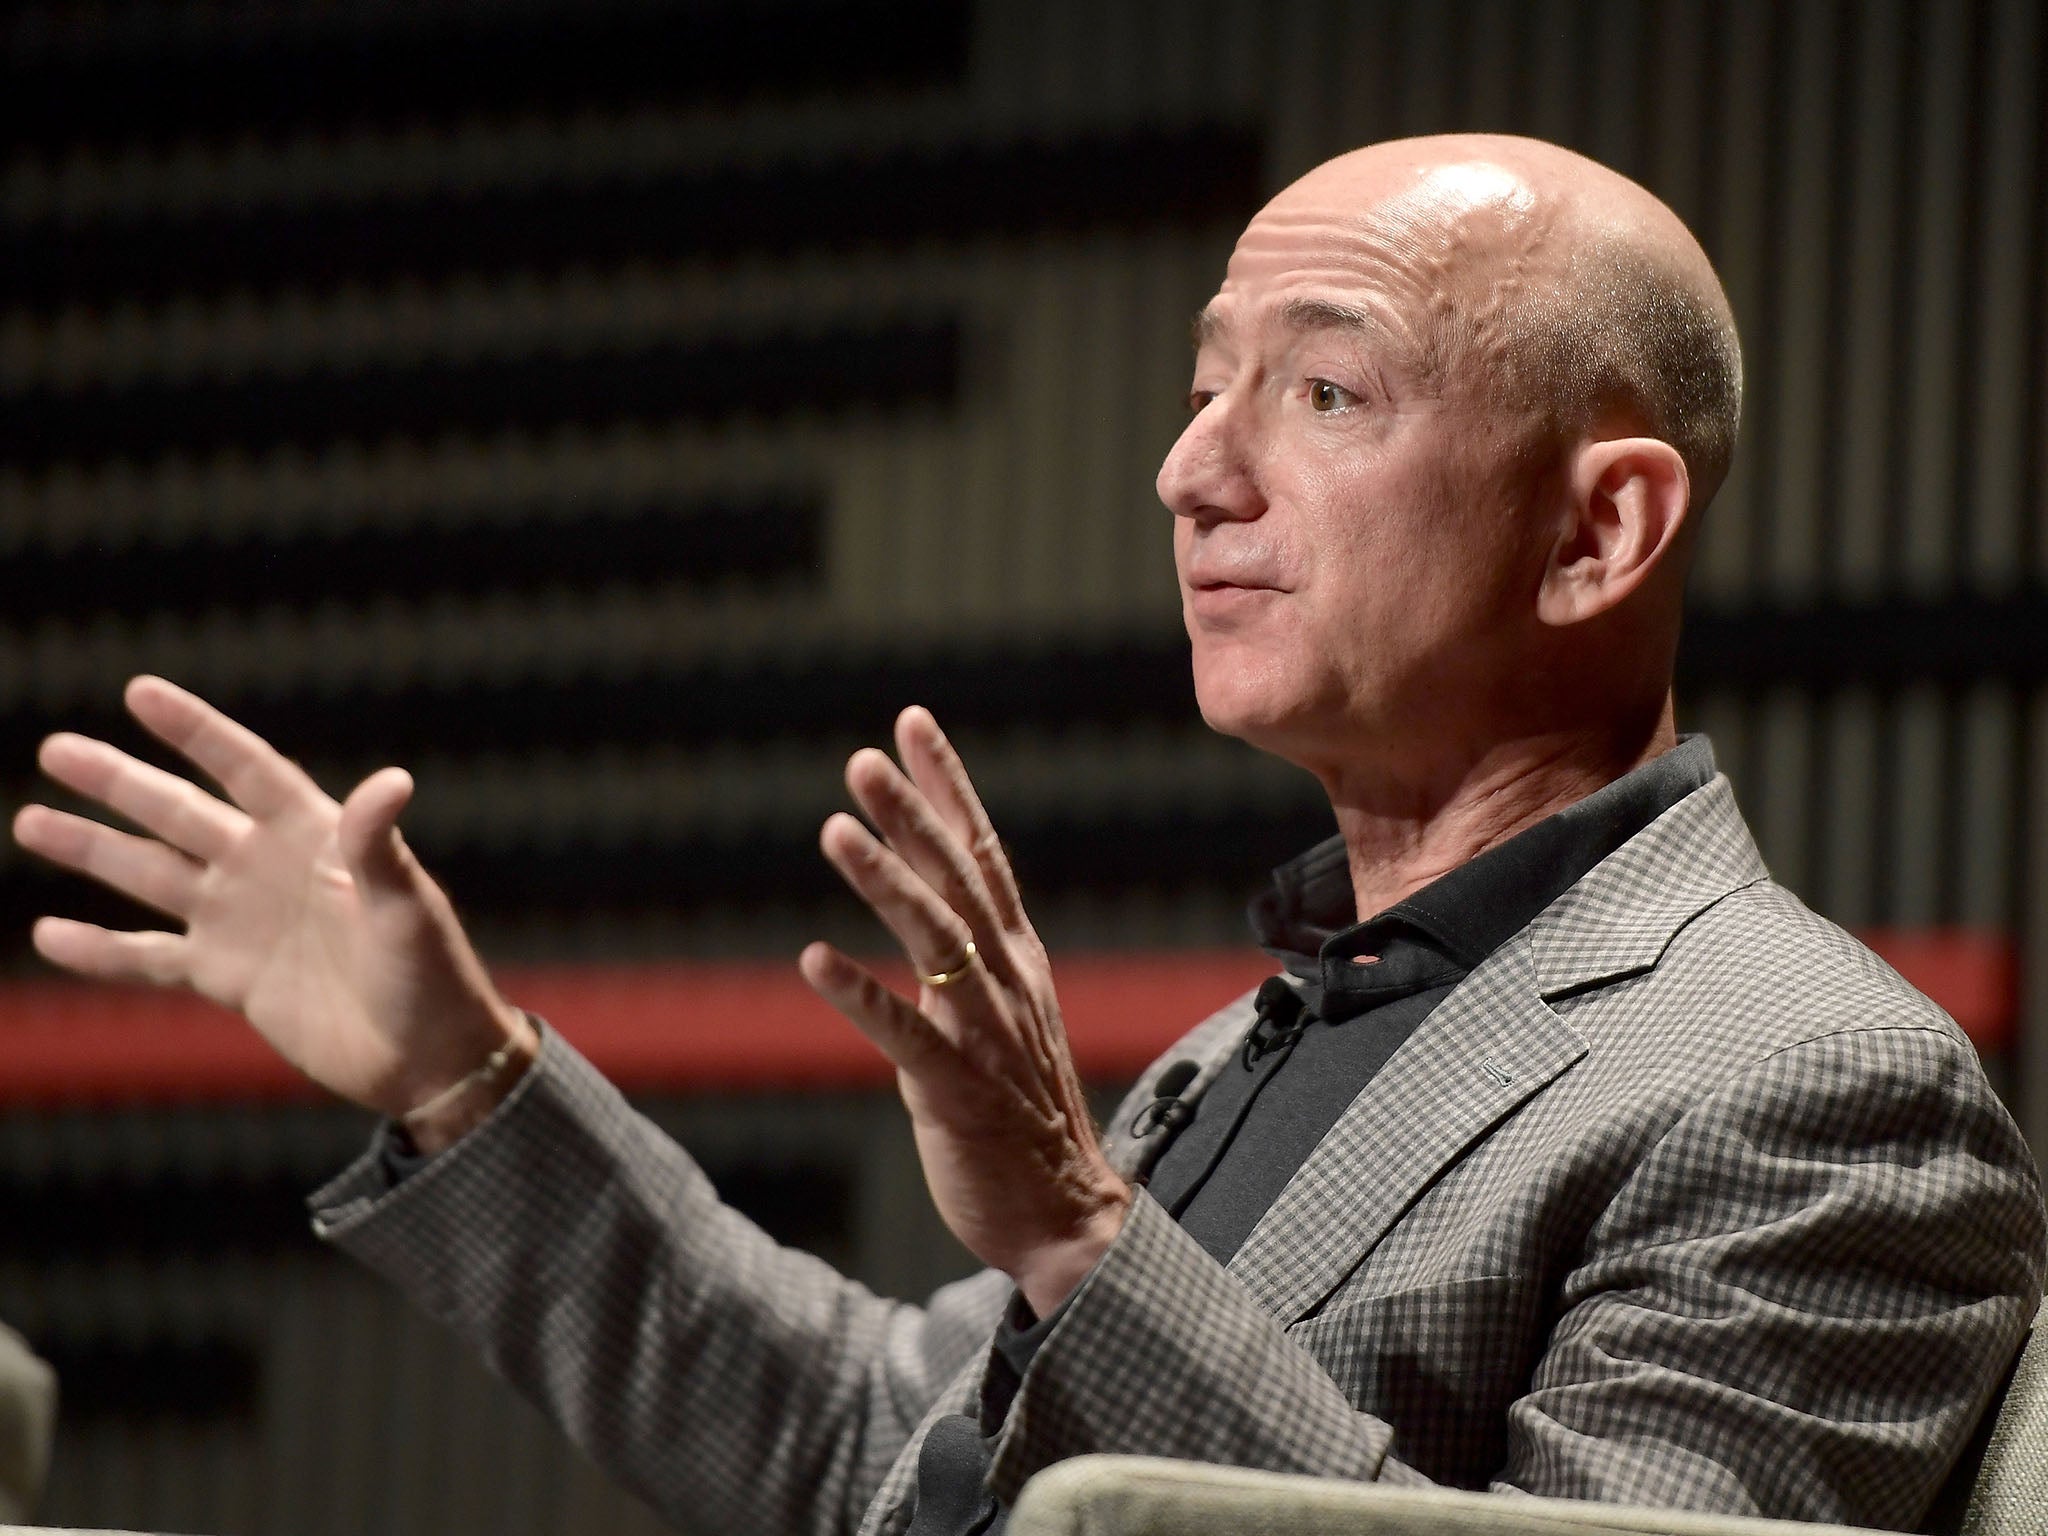 This is not the first space related venture for Amazon's Jeff Bezos